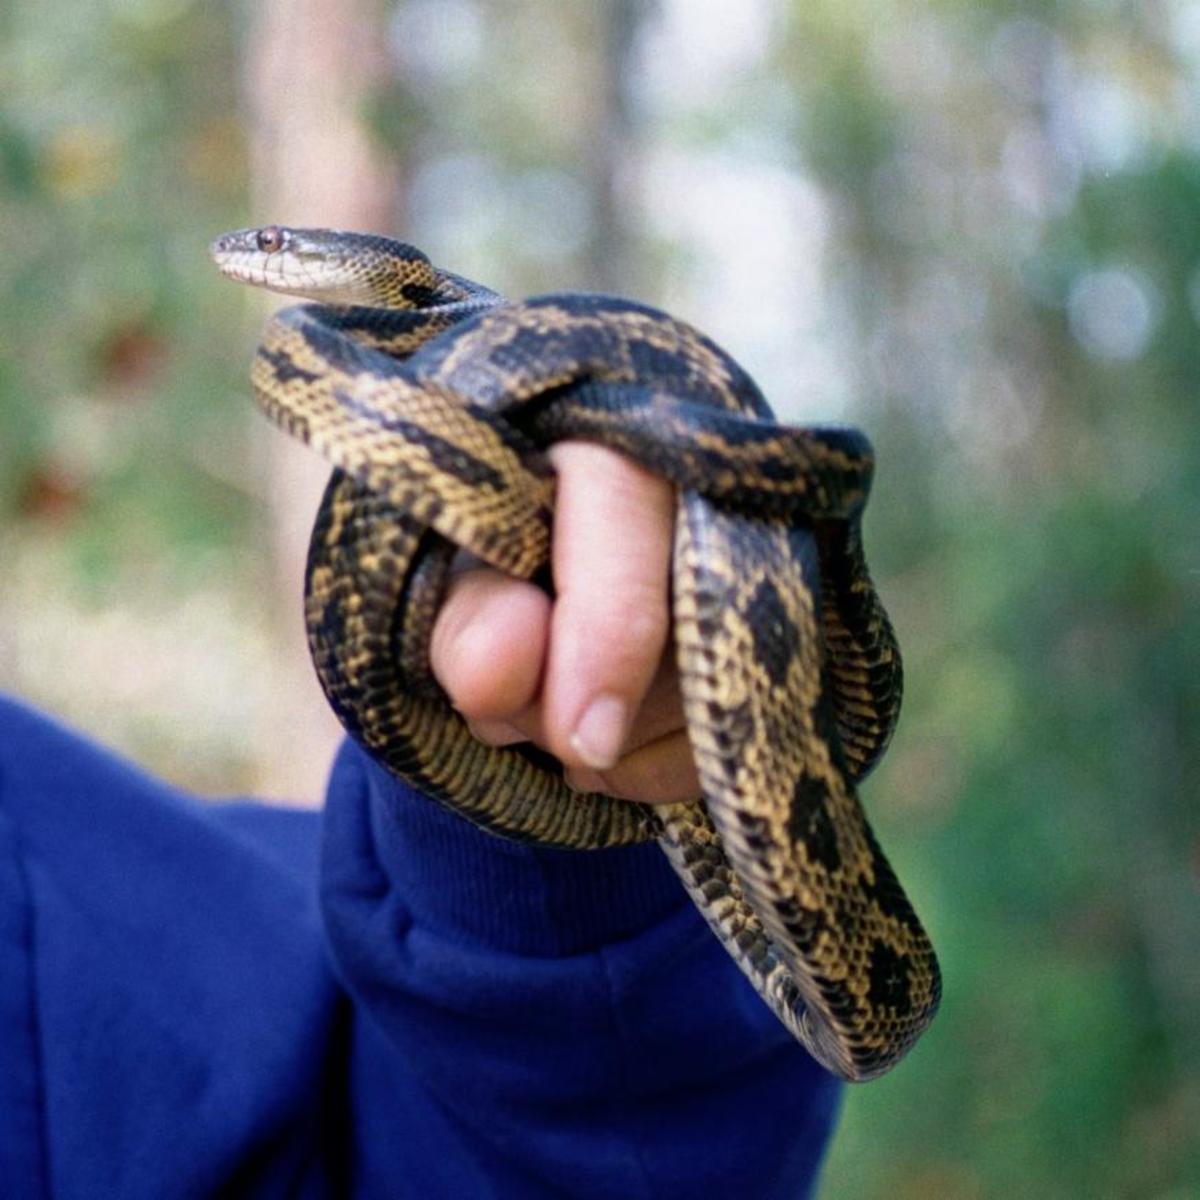 Texas Rat snakes are also constrictors. They eat many rats and other rodents.